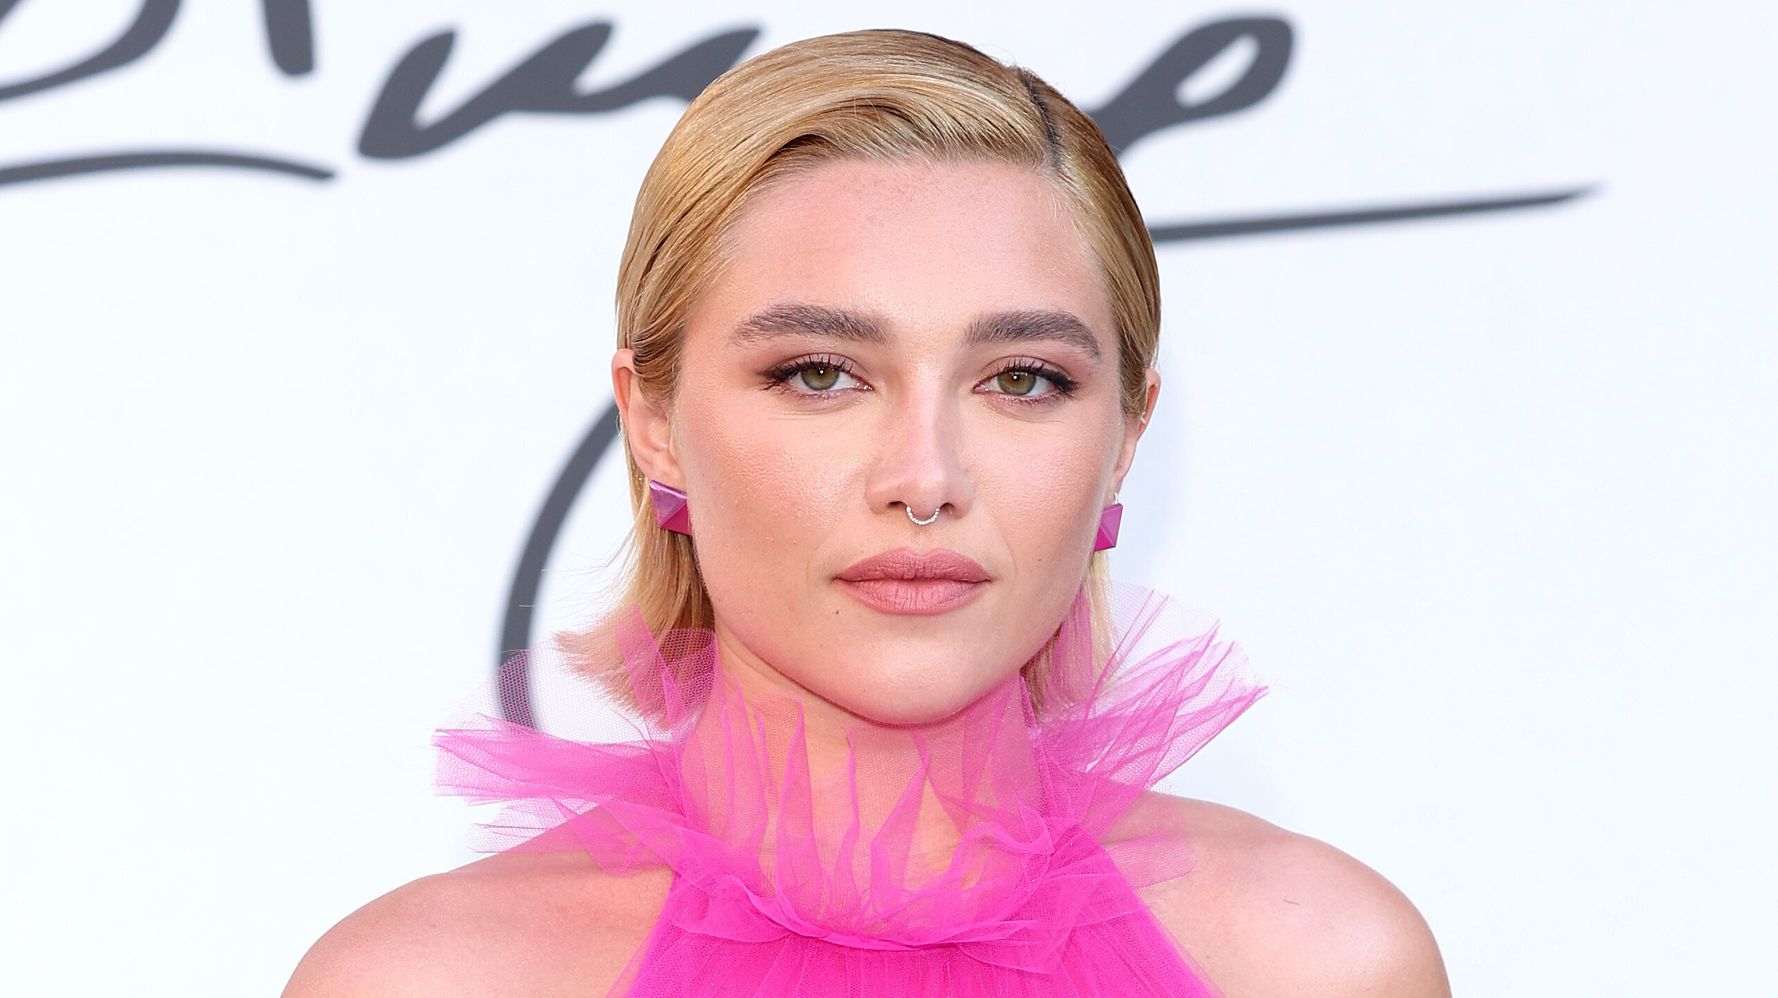 Florence Pugh Tells 'Vulgar' Men Bothered By Her See-Through Dress To 'Grow Up'